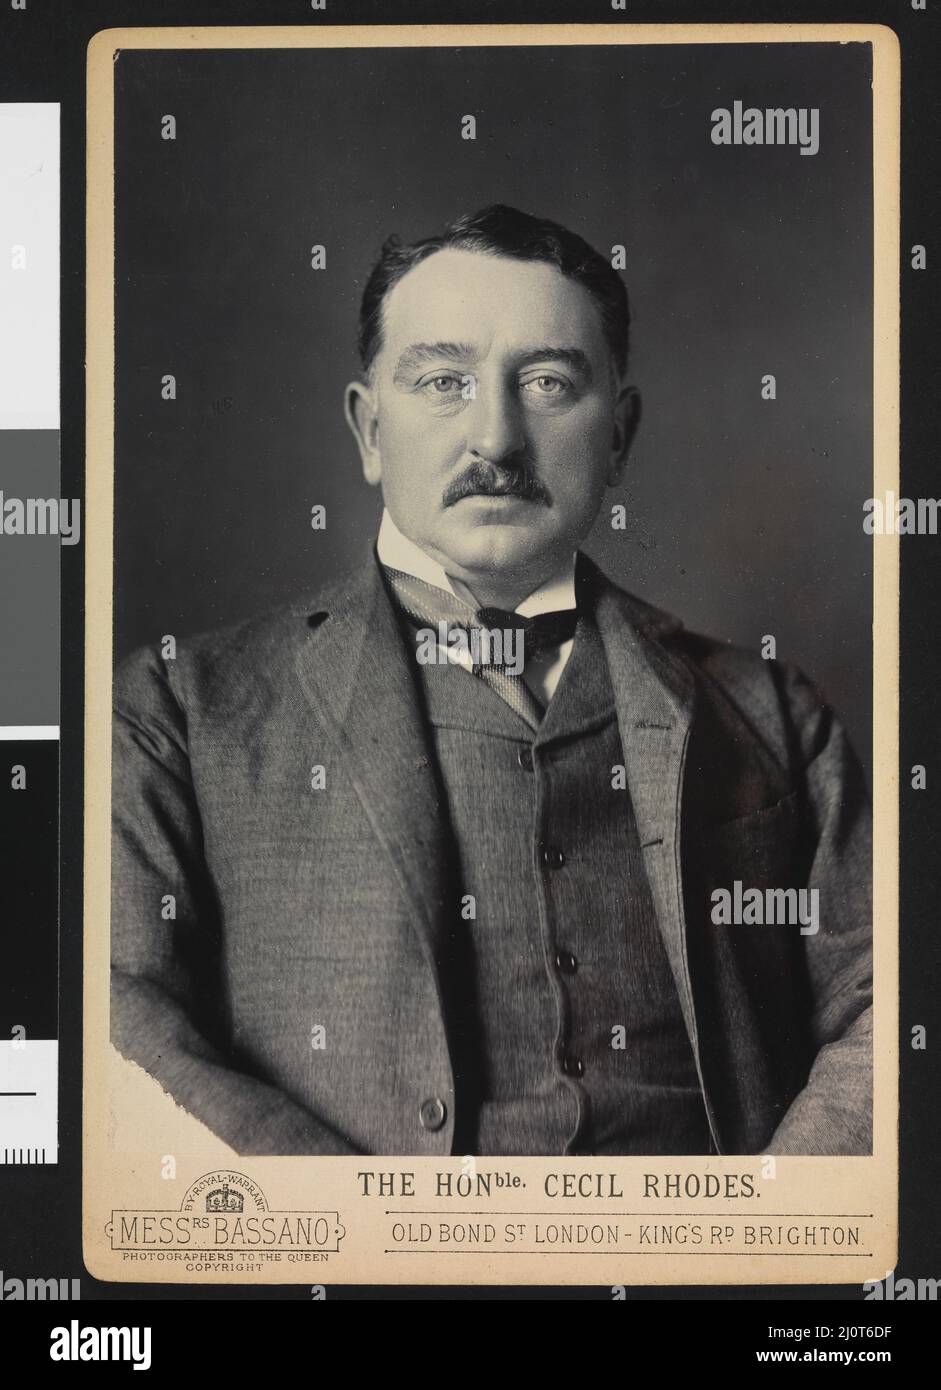 Cecil John Rhodes (5 July 1853, 26 March 1902) was an English-born South  African businessman, mining magnate, and politician. He was the founder of  the diamond company De Beers, which today markets